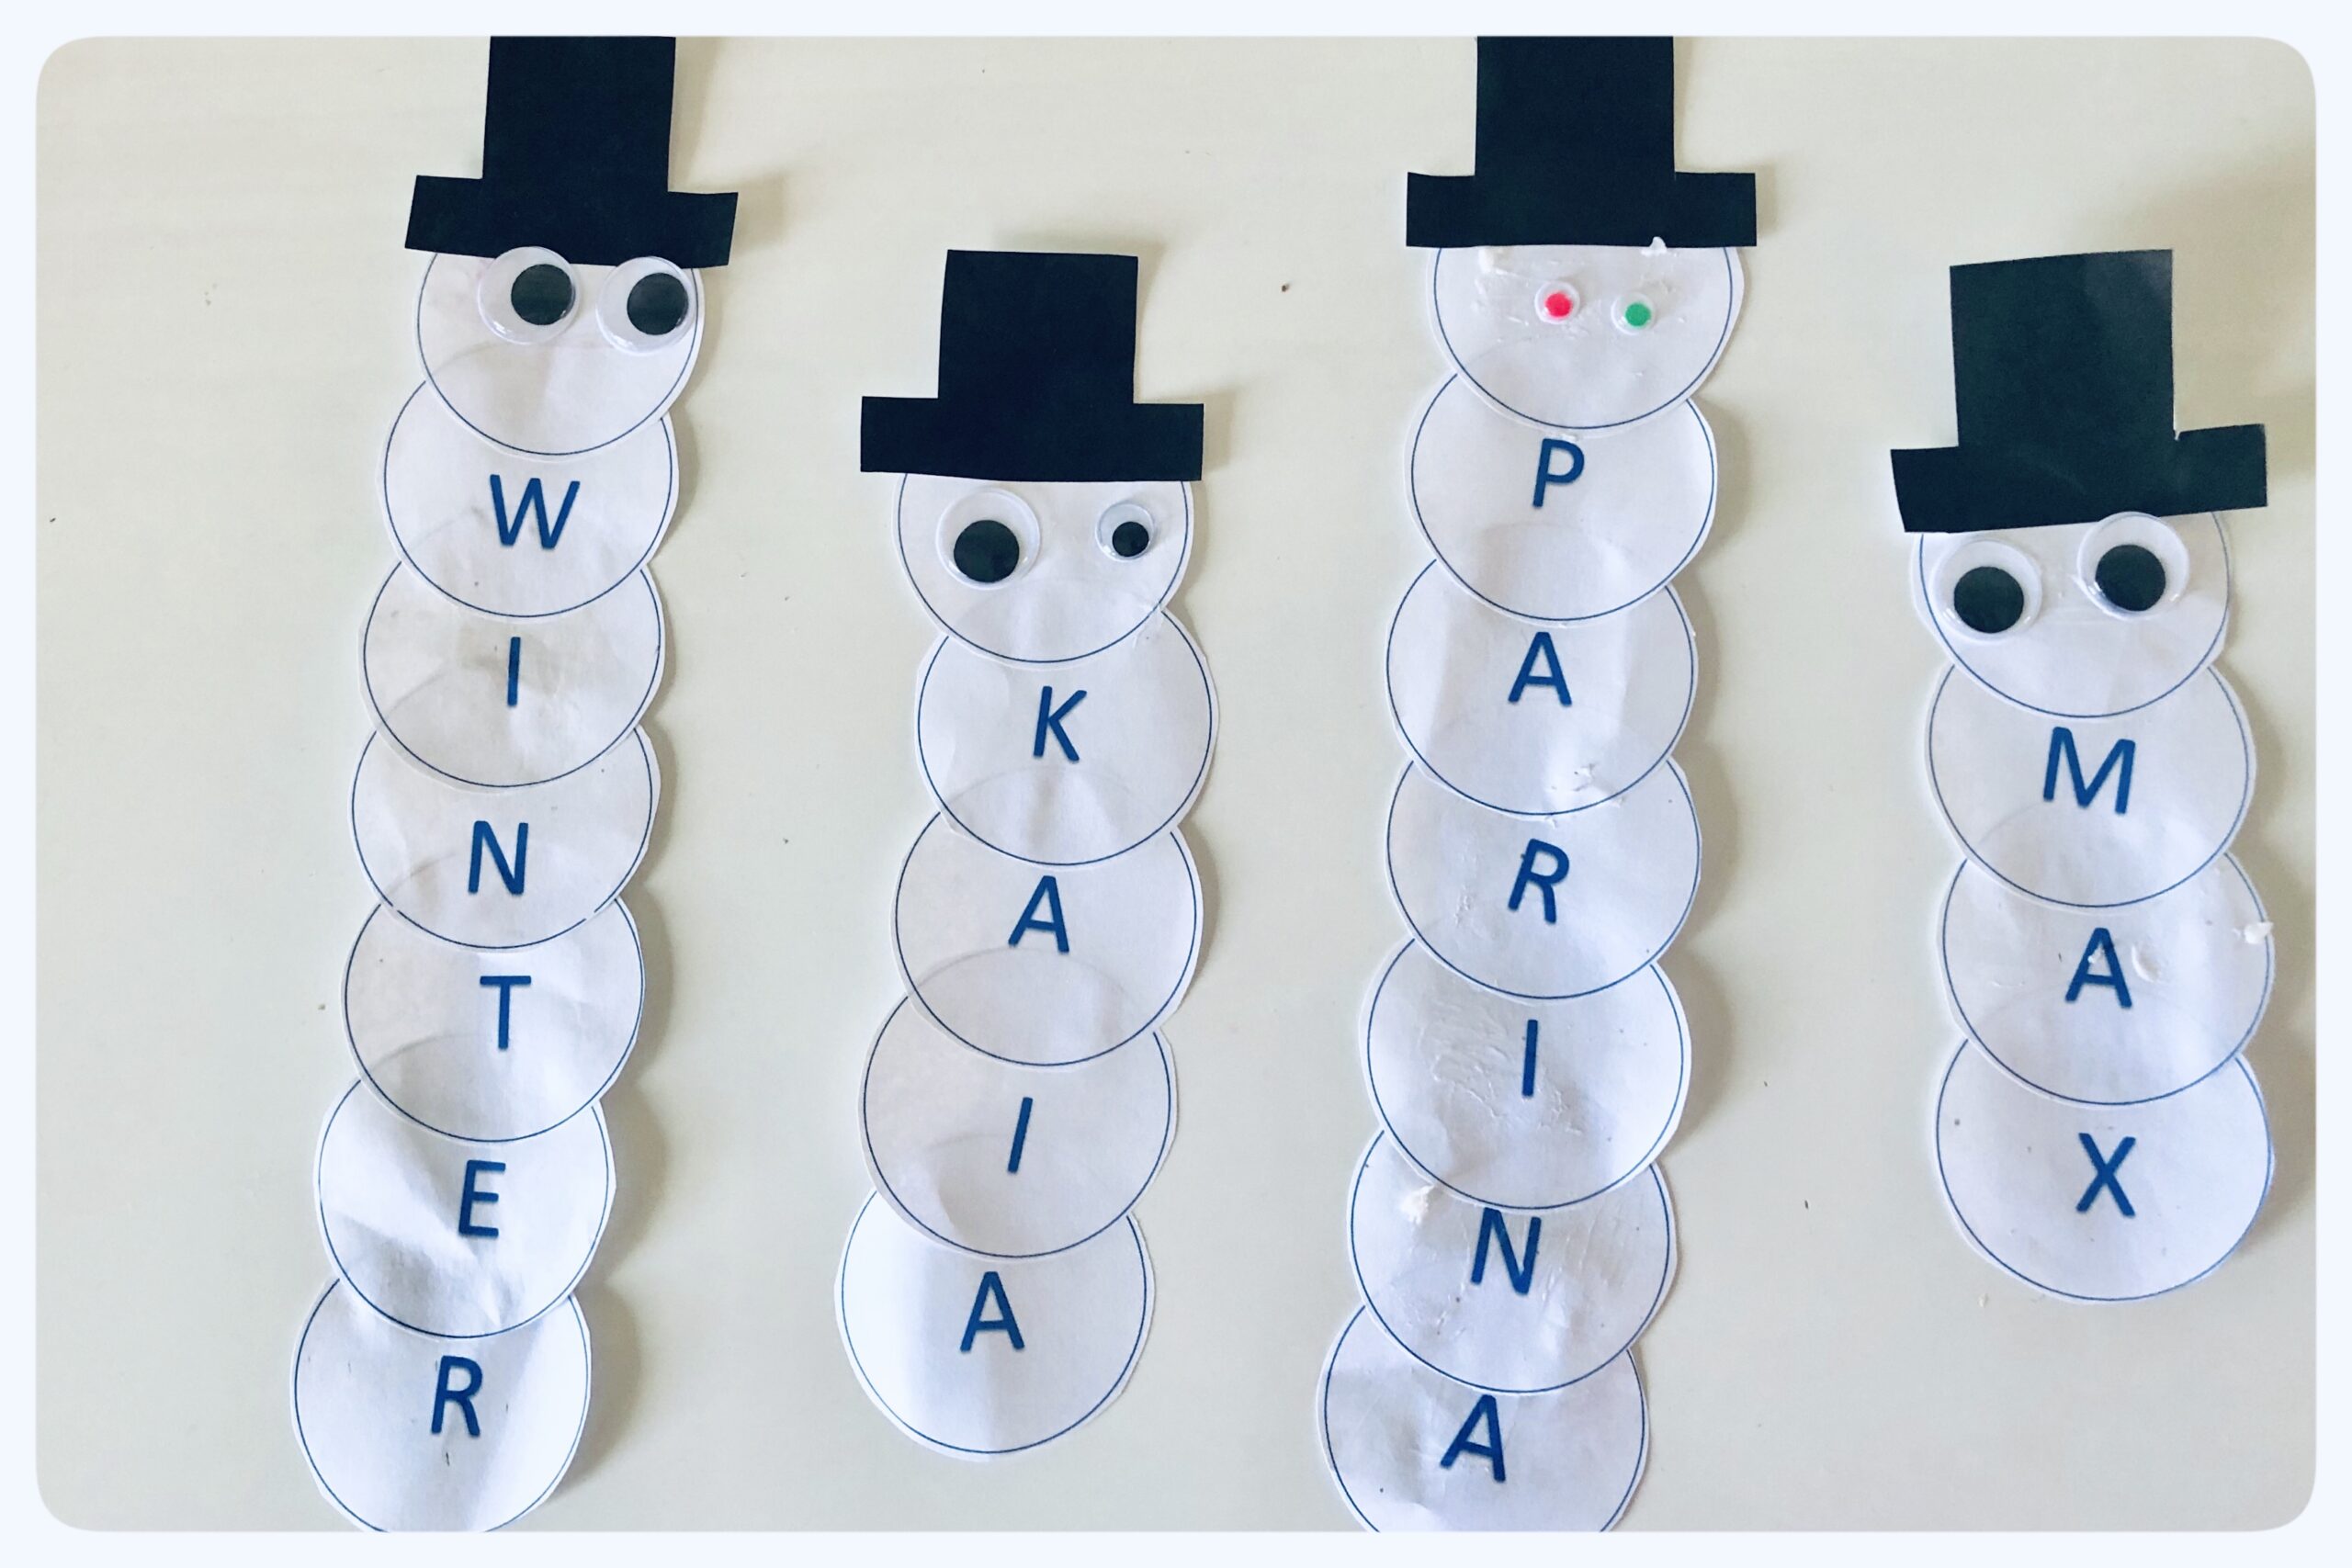 We’re ready for winter now with our Snowmen! This fun activity is great for letter recognition & fine motor skill development. ?? swipe to see how we set this up. ⛄️ Each child had the circles with letters of their name, plus one blank circle, and one black top hat. We talked about the first letter of everyone’s name and each child picked their letter out. With some help, they glued their letters together and added the top hat. Then the fun of choosing which wiggly eyes to put on ? They were So proud. Just look at their sweet faces! ? 